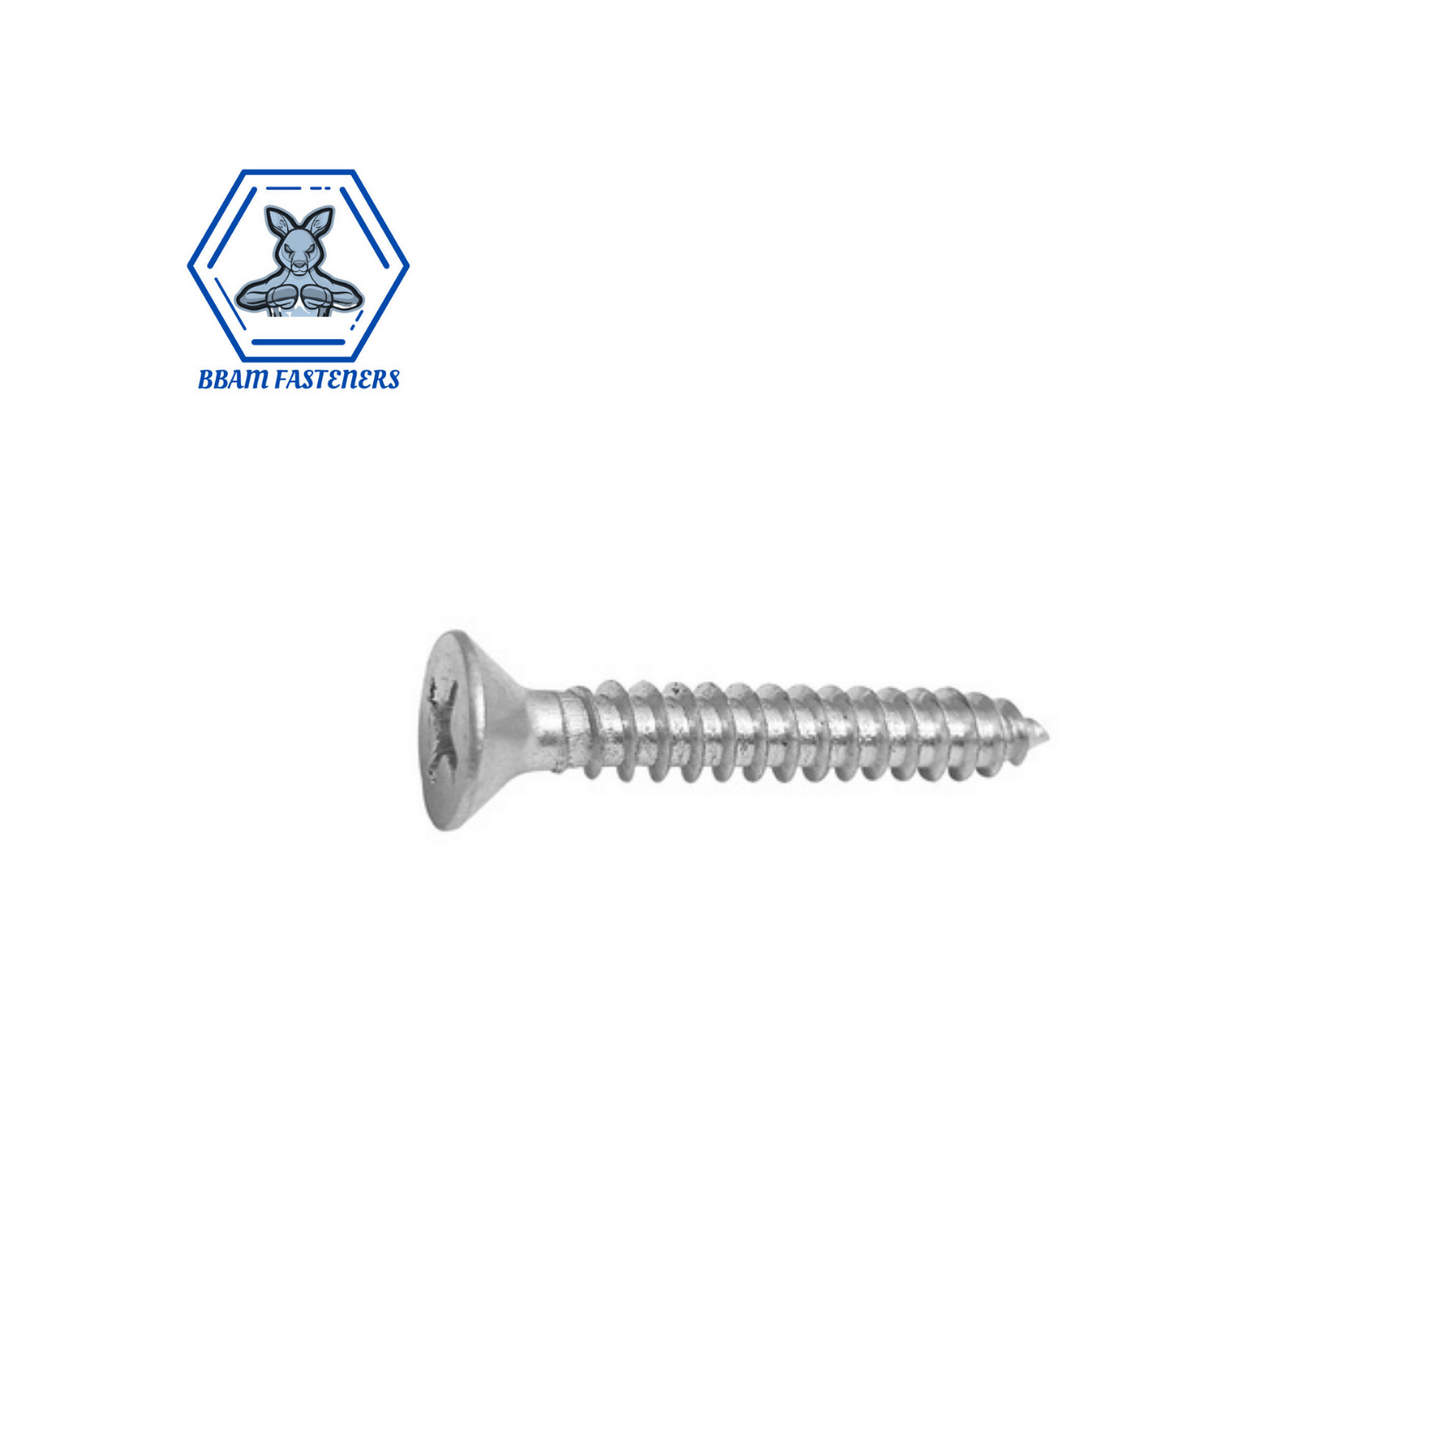 8G x 50mm Self Tapping Screw Countersunk Zinc Plated